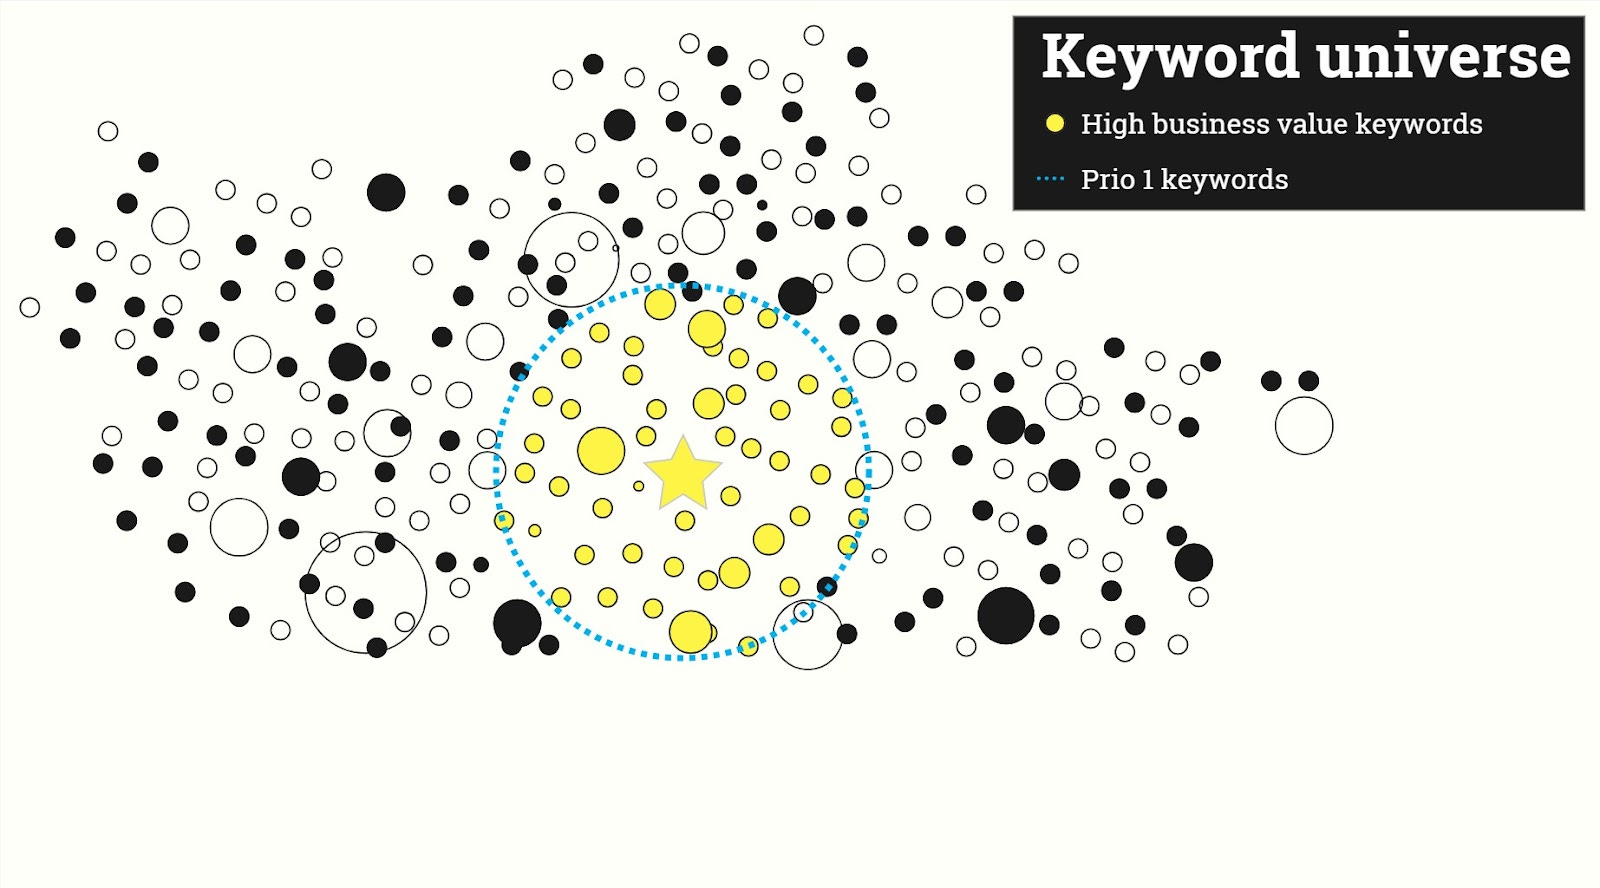 A Keyword Universe is a big **** that surfaces the most important keywords.